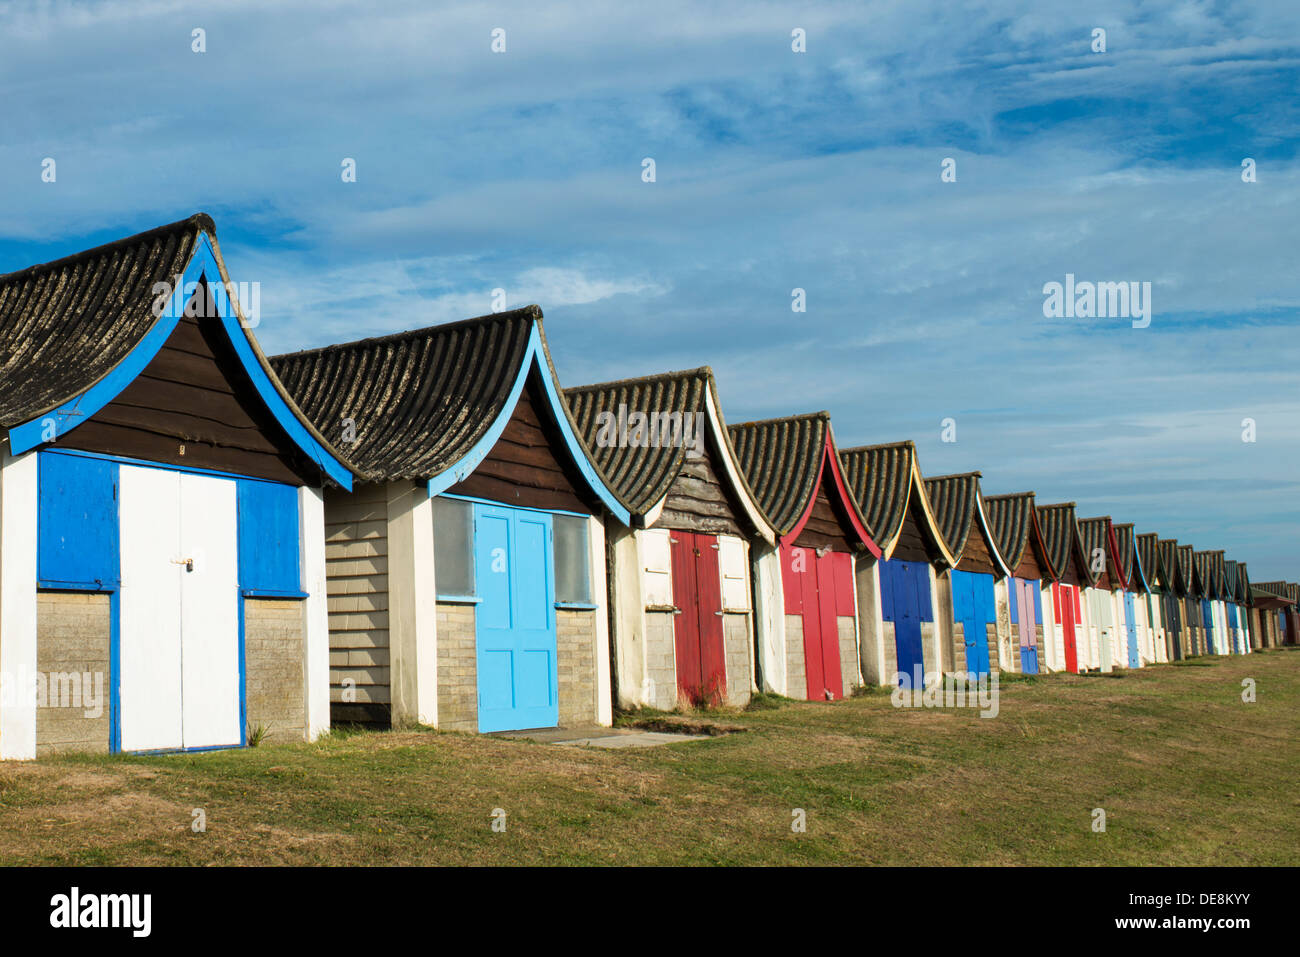 Spiaggia Mablethorpe Capanne Foto Stock